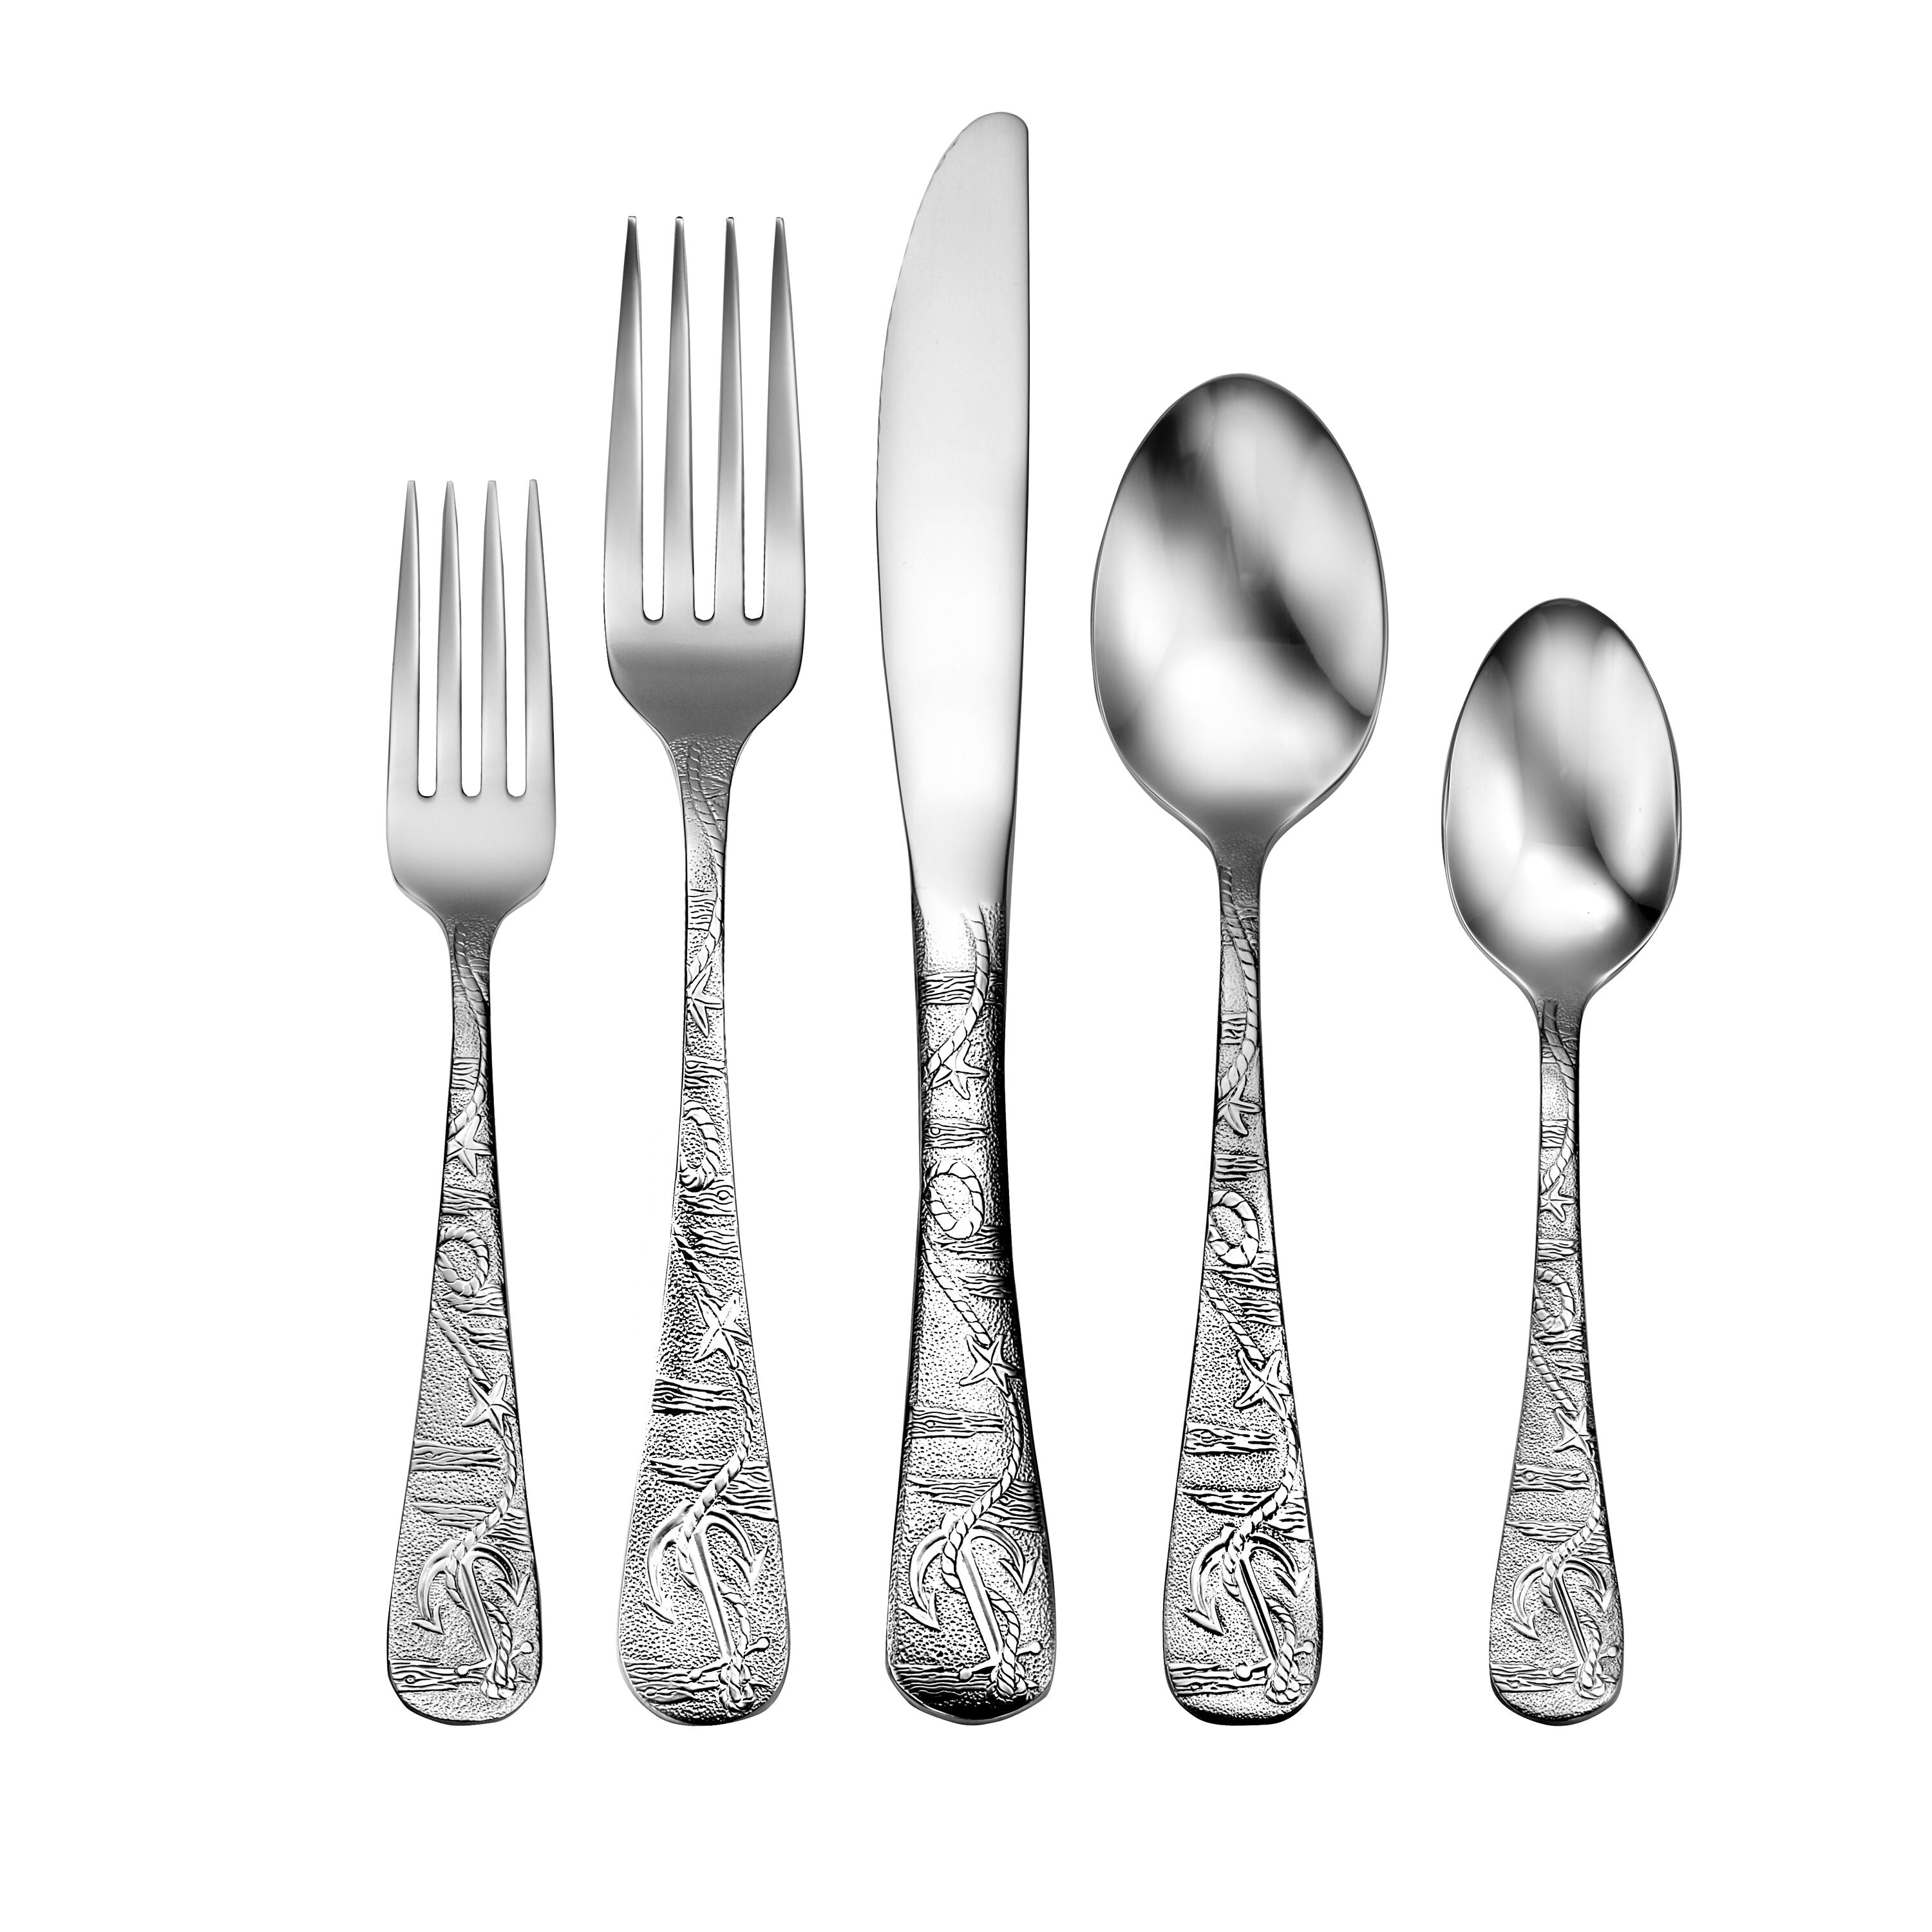 Earth - Liberty Tabletop - The Only Flatware Made in the USA